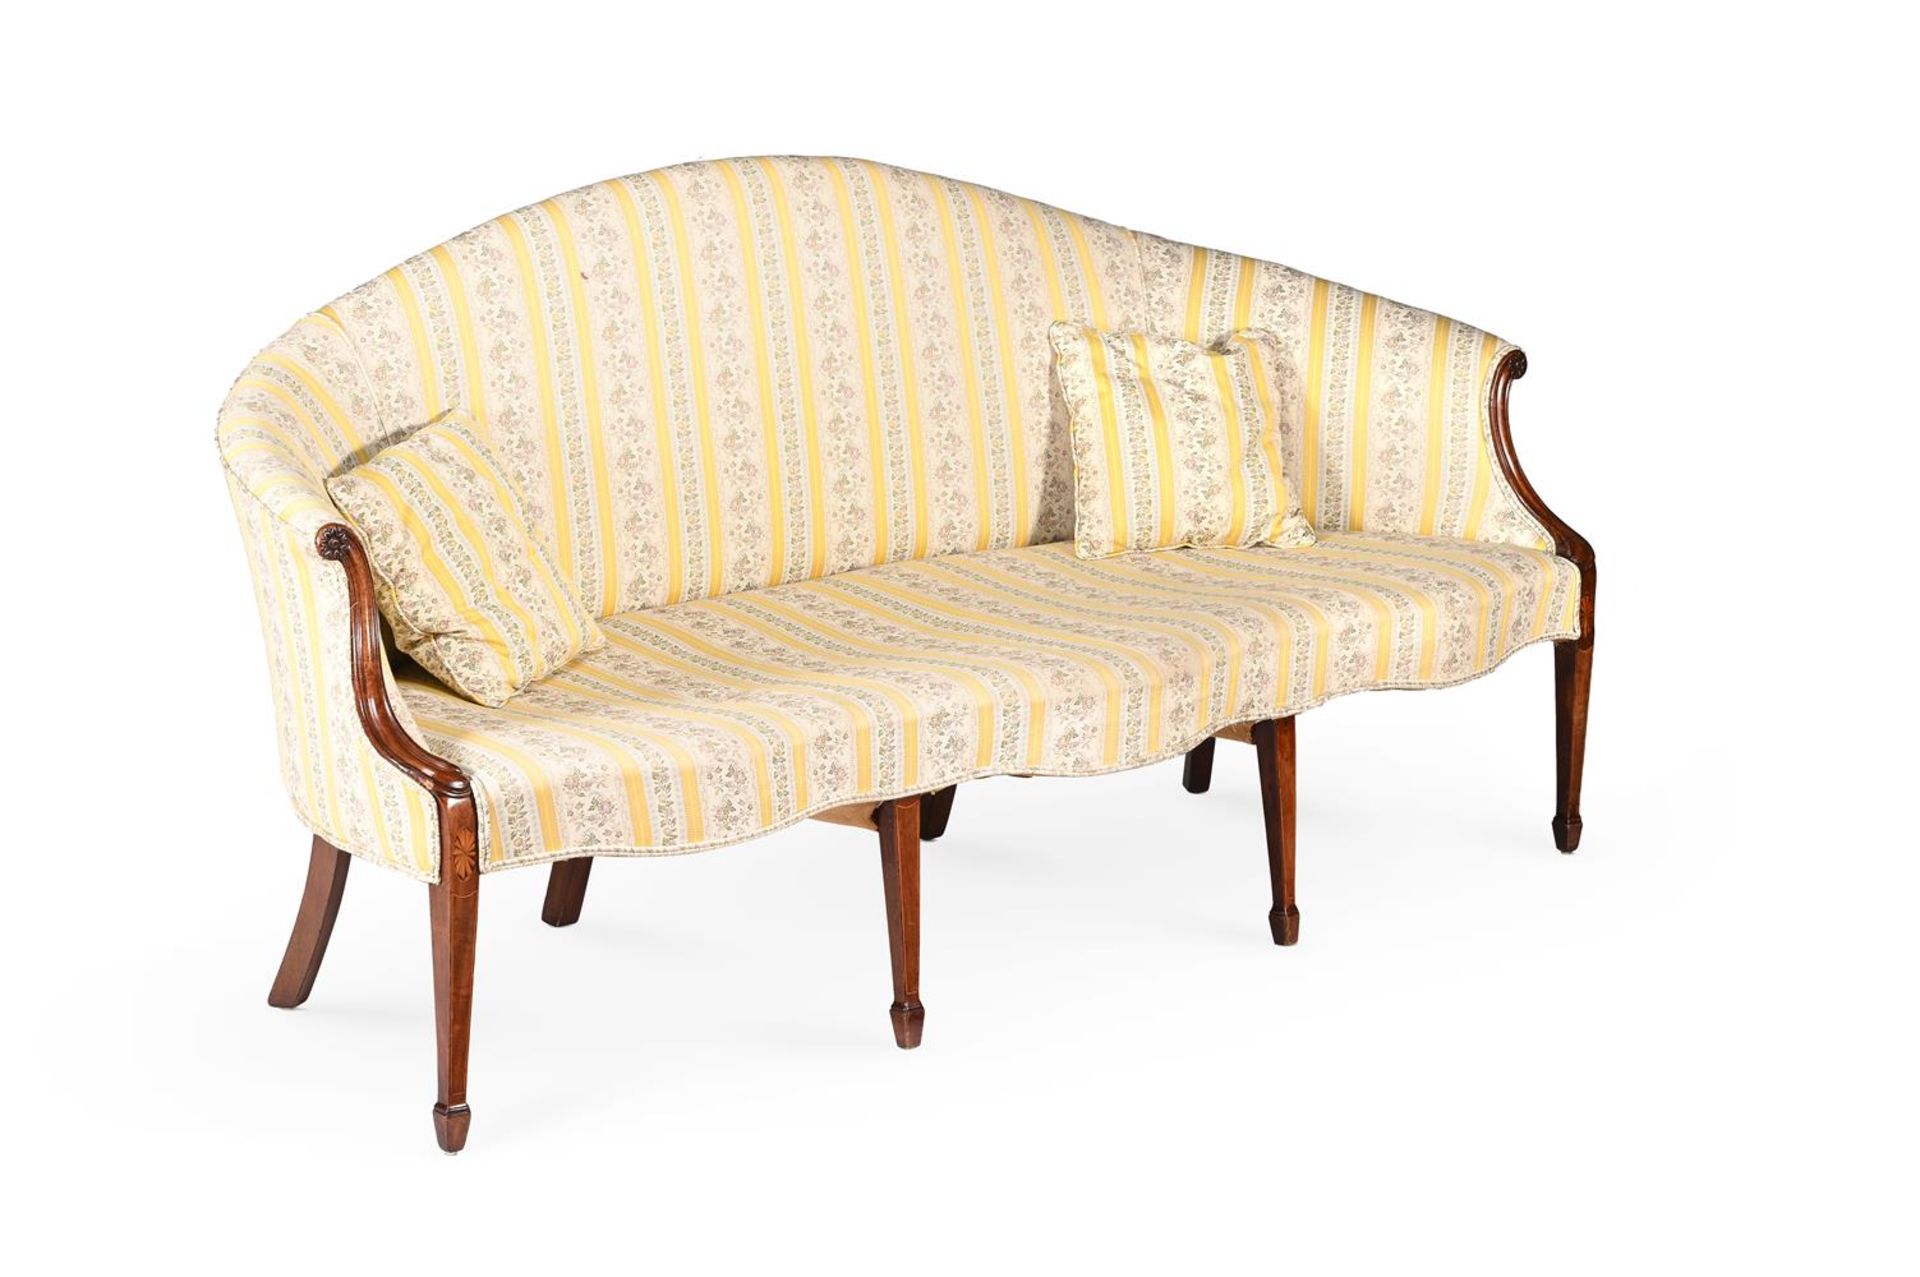 A GEORGE III MAHOGANY AND UPHOLSTERED SERPENTINE SHAPED SOFAIN THE MANNER OF GEORGE HEPPLEWHITE - Image 2 of 3